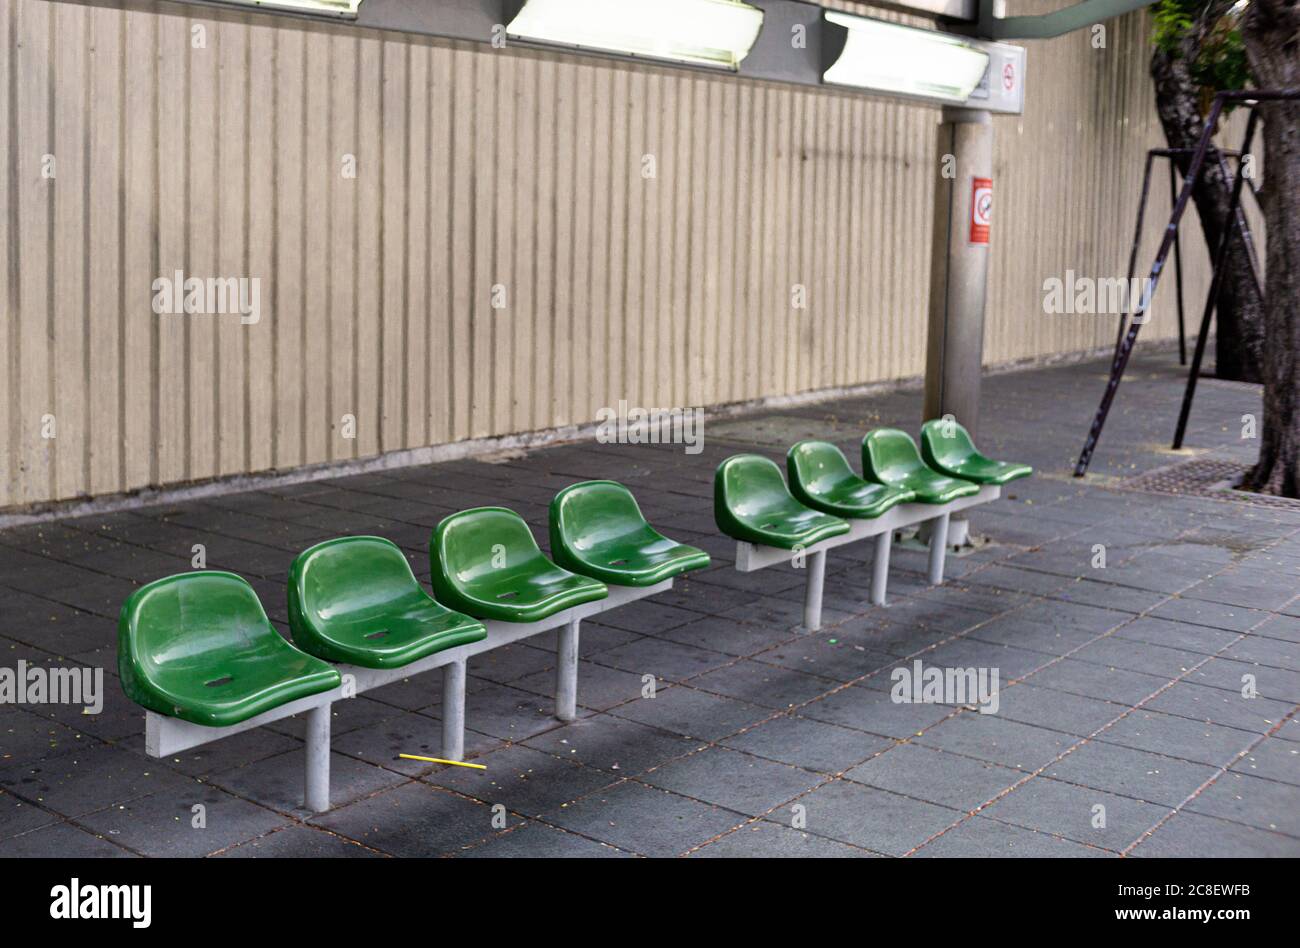 a bus stop was no people due to restriction movement during Covid-19 time, Bangkok Thailand Stock Photo